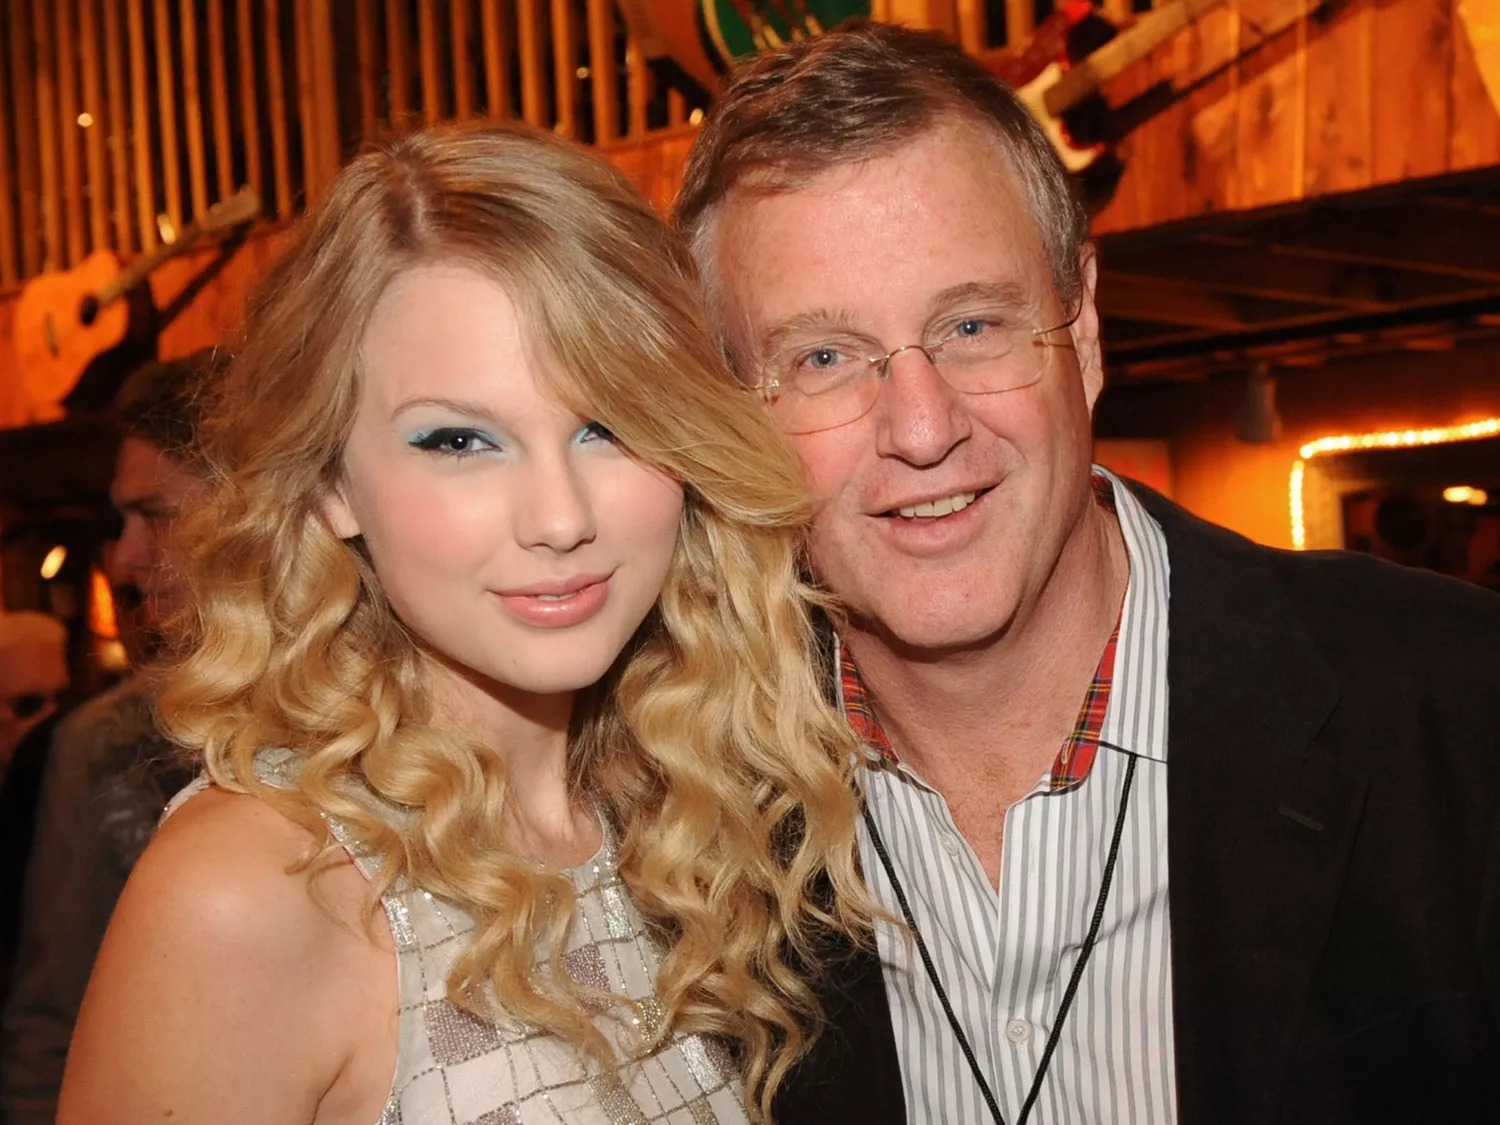 All About Taylor Swift's Parents, Scott and Andrea Swift